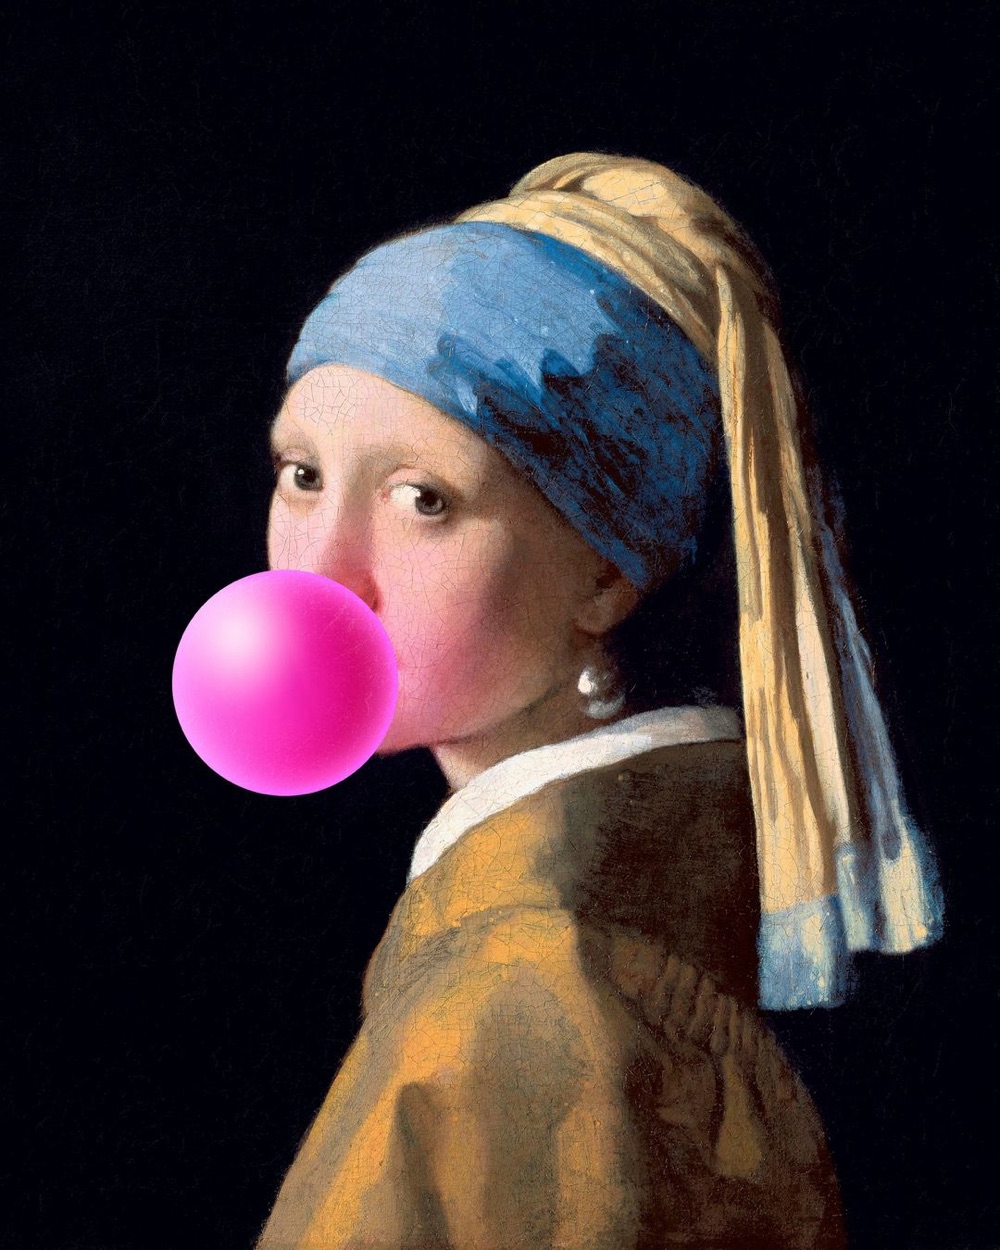 remix of Girl With a Pearl Earring blowing a bubble